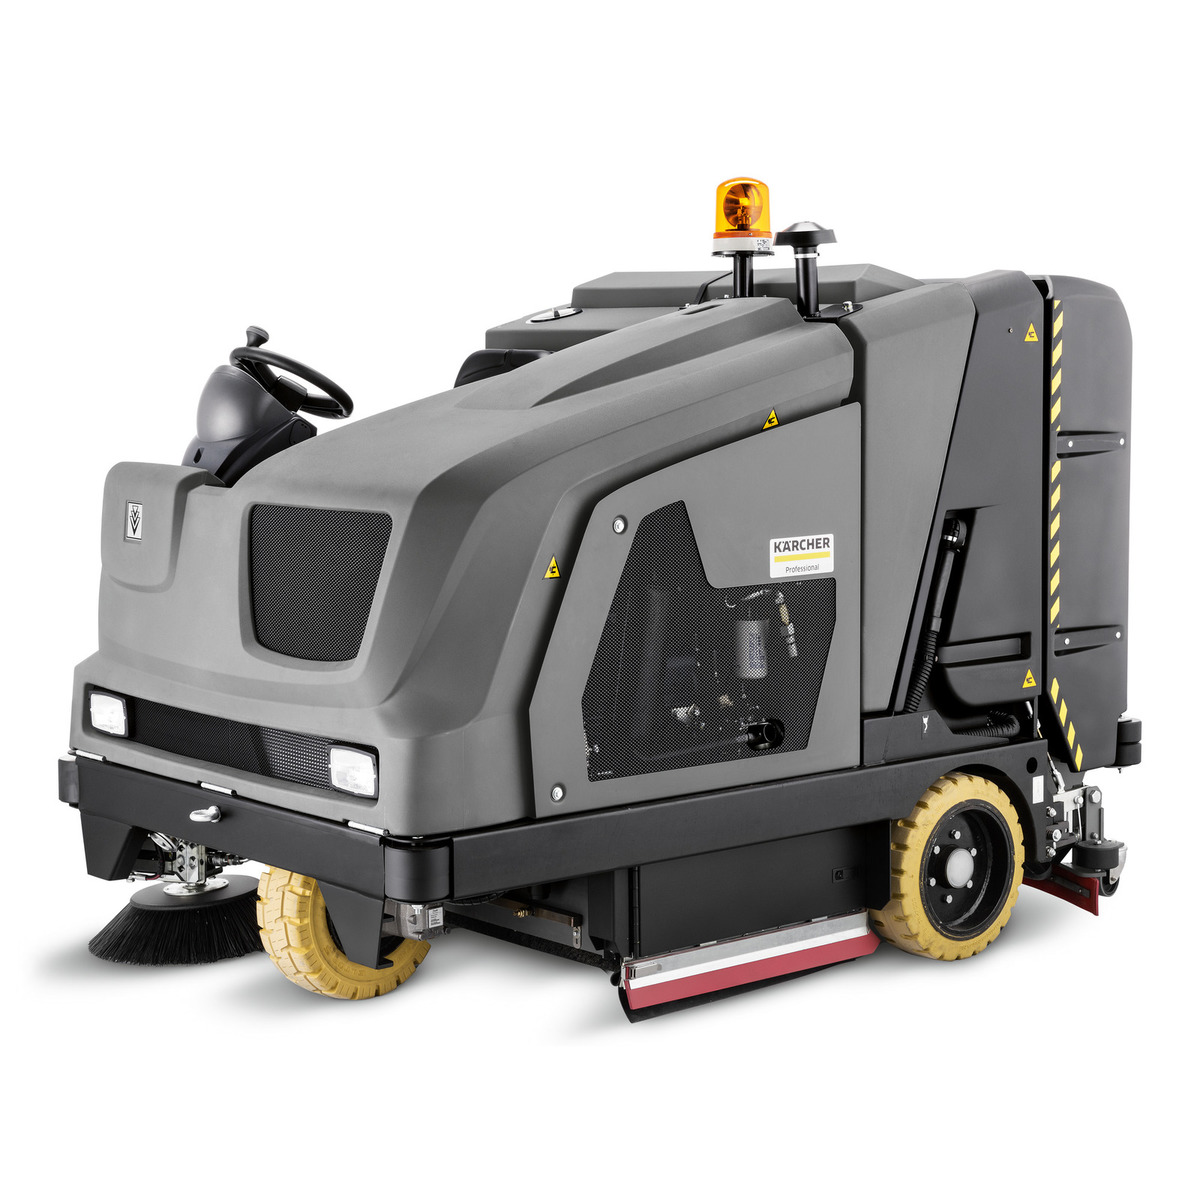 Karcher B 300 R I Karcher, B, 300, R, I, ride, on, large, area, commercial, professional, wide-area, industrial, auto-scrubber, scrubber, ride-on, floor, cleaning, 